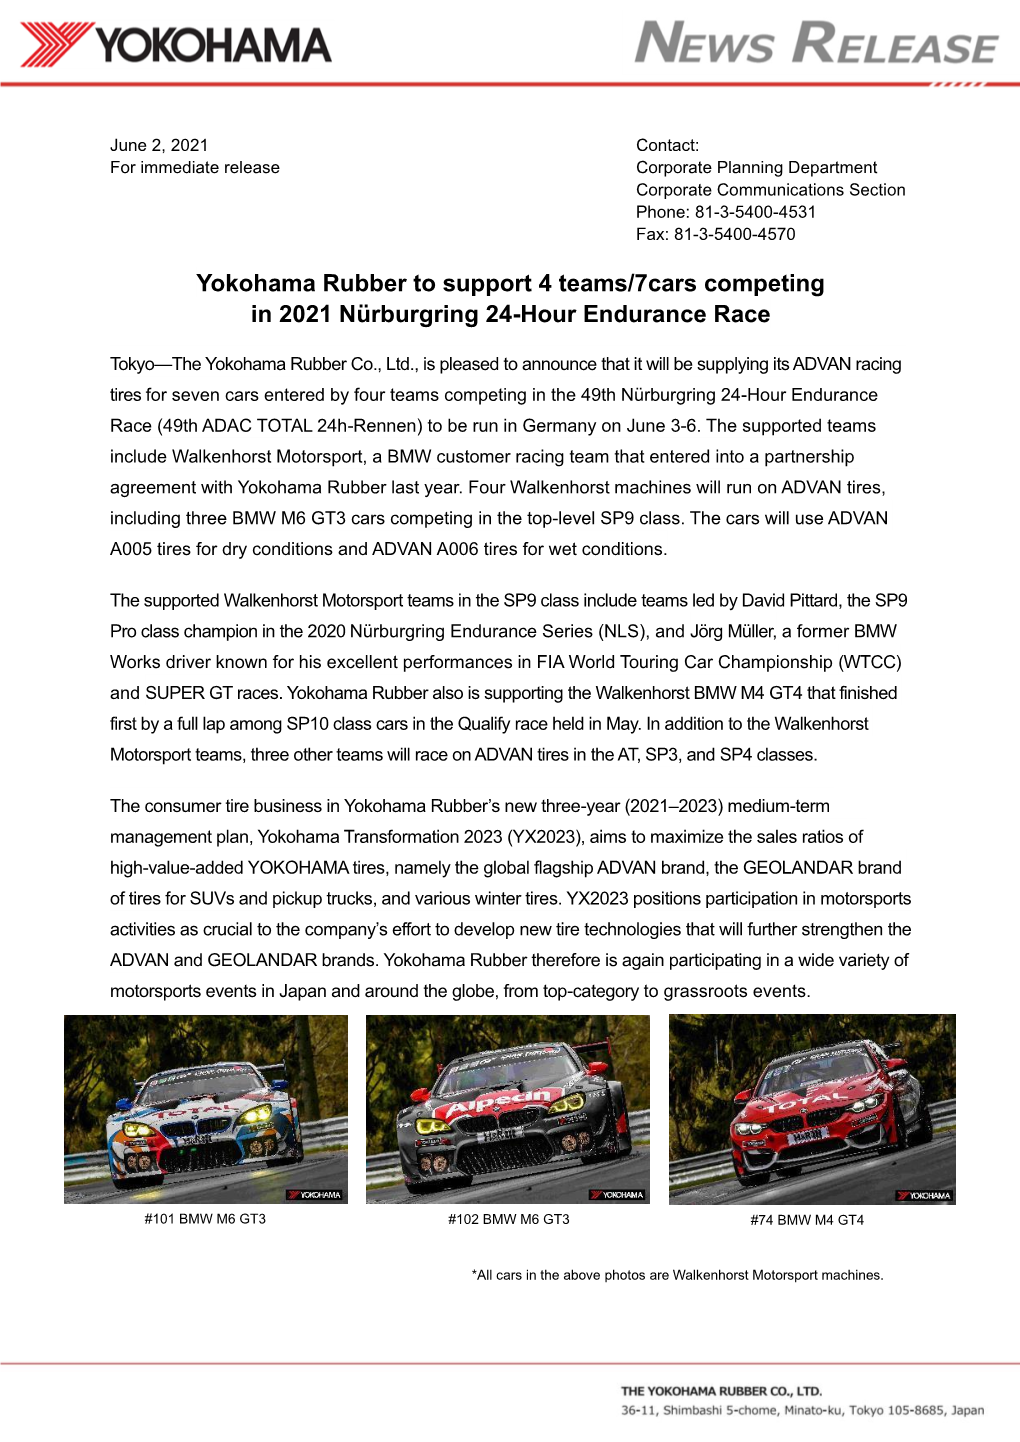 Yokohama Rubber to Support 4 Teams/7Cars Competing in 2021 Nürburgring 24-Hour Endurance Race